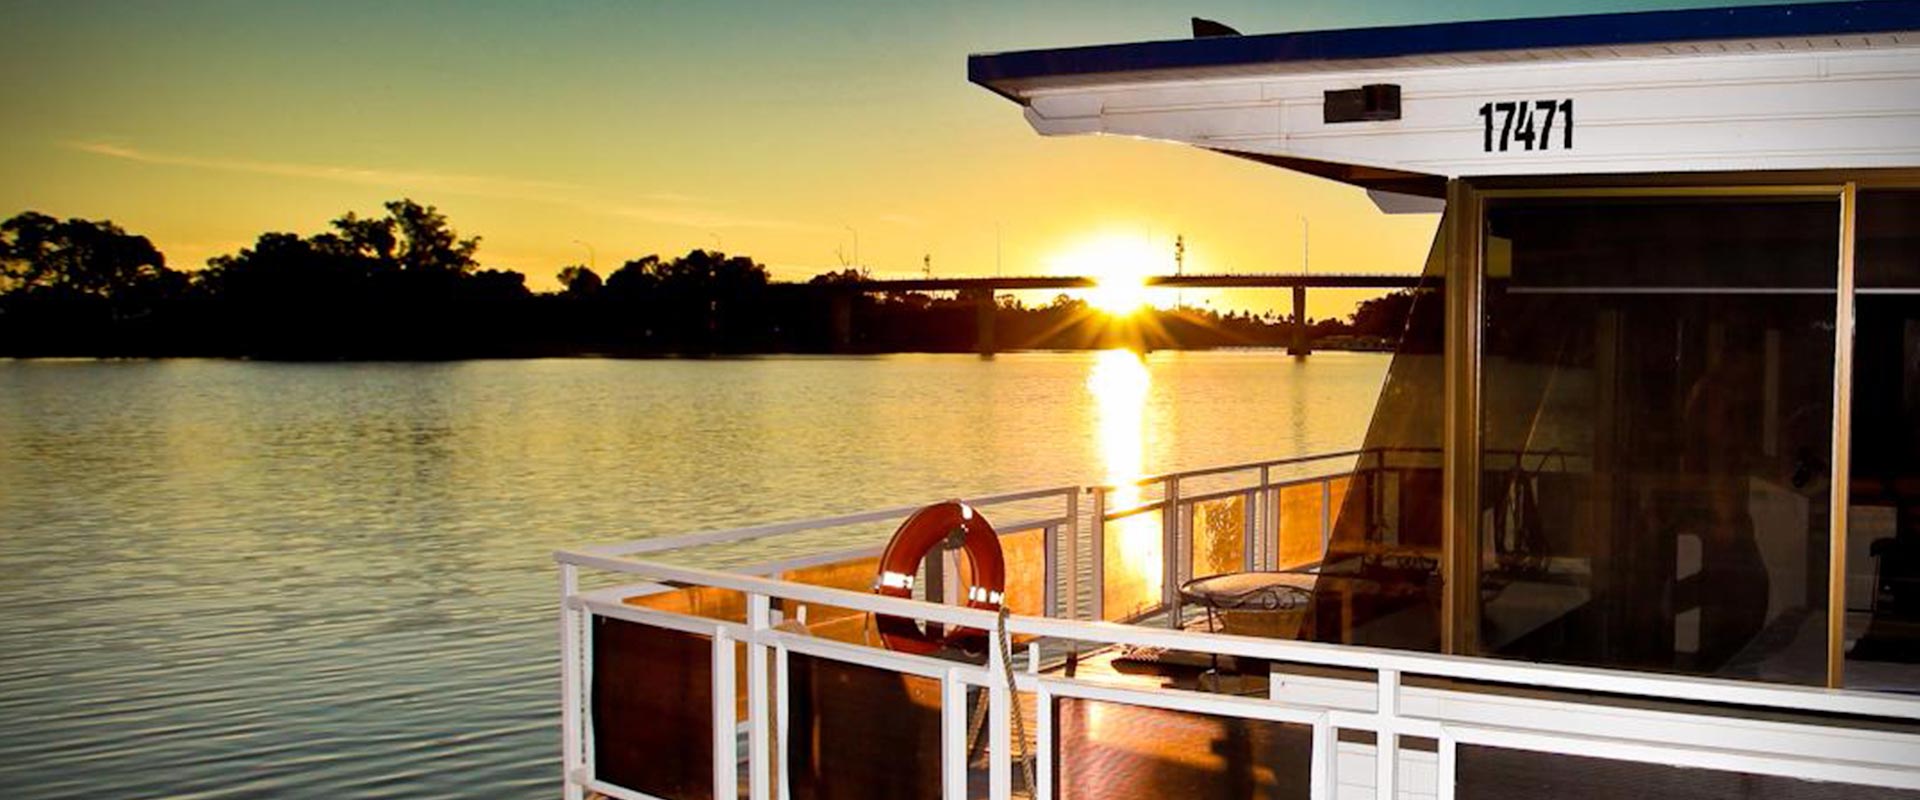 Sunset on the Murray River Houseboat